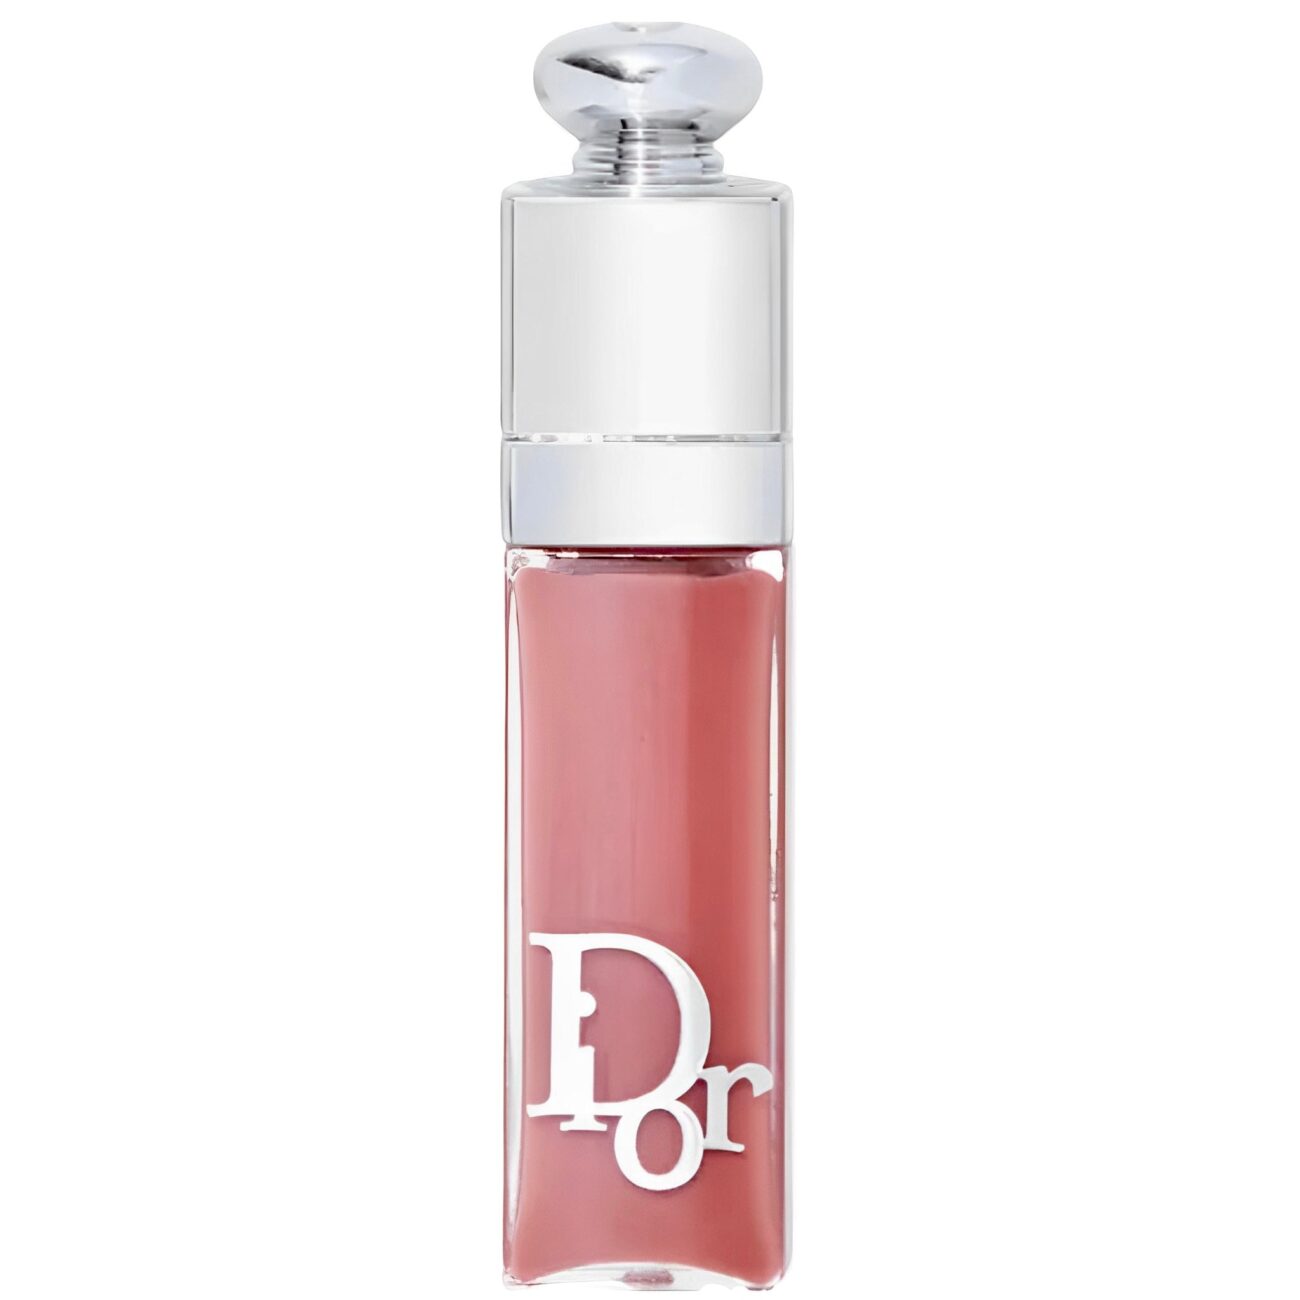 Addict Lip Maximizer Plumping Gloss trial size in 038 Rose Nude-DIOR